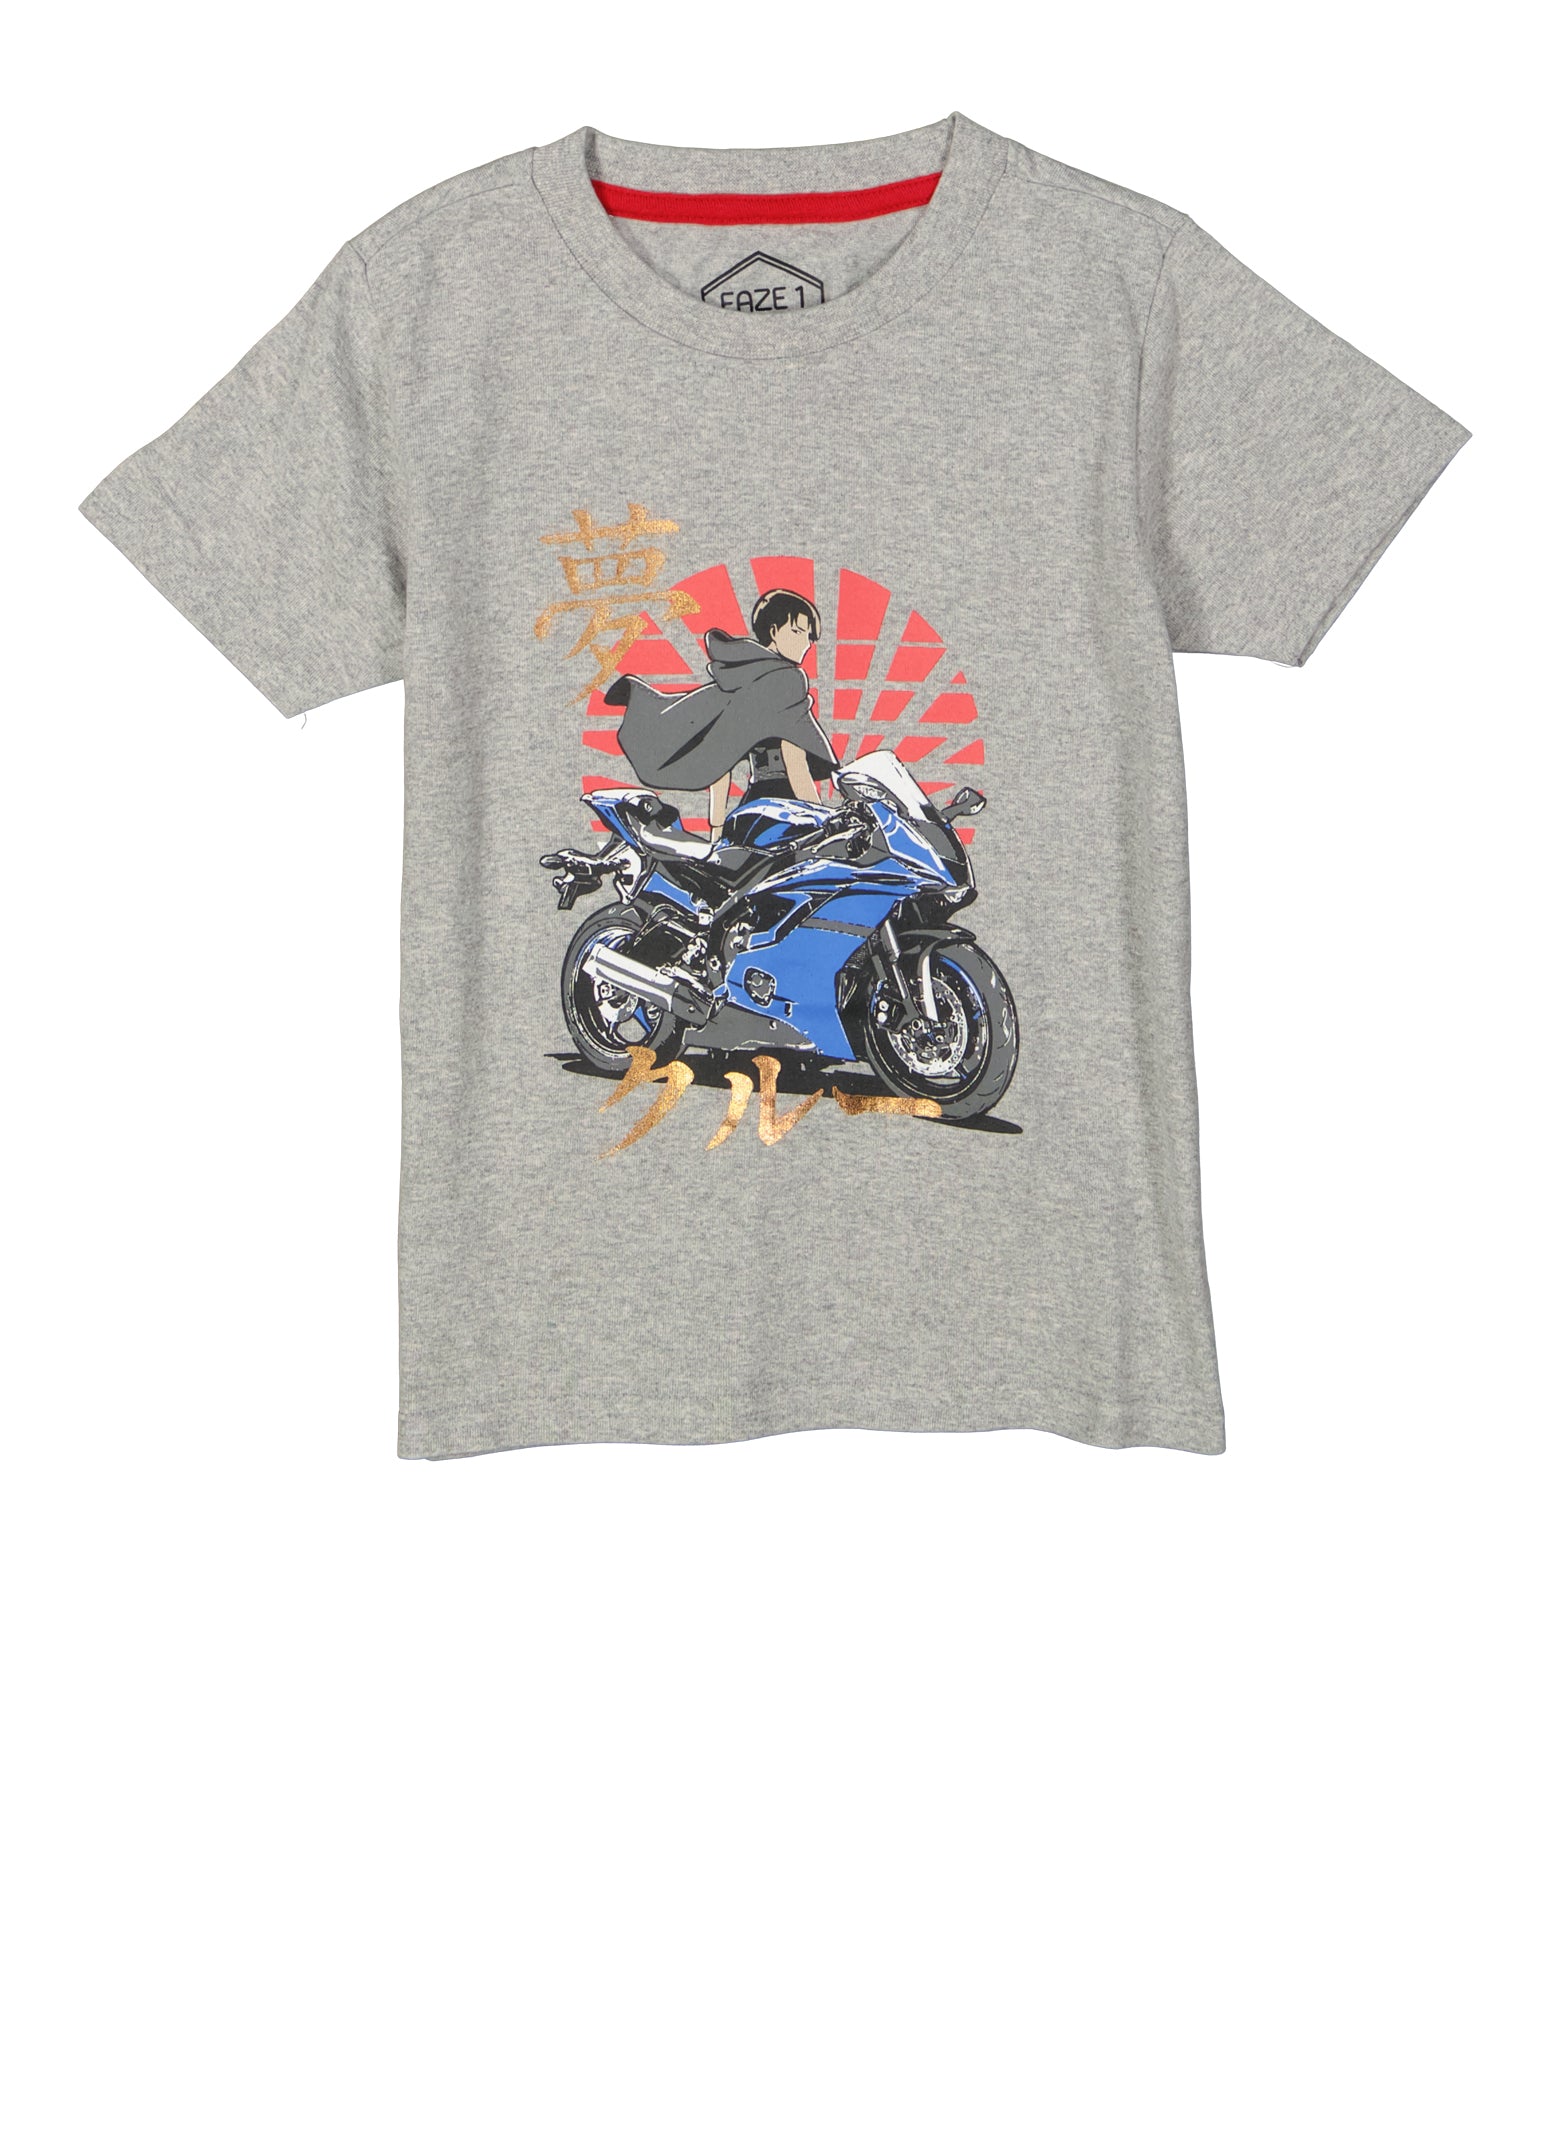 Little Boys Motorcycle Graphic Tee, Grey, Size 6